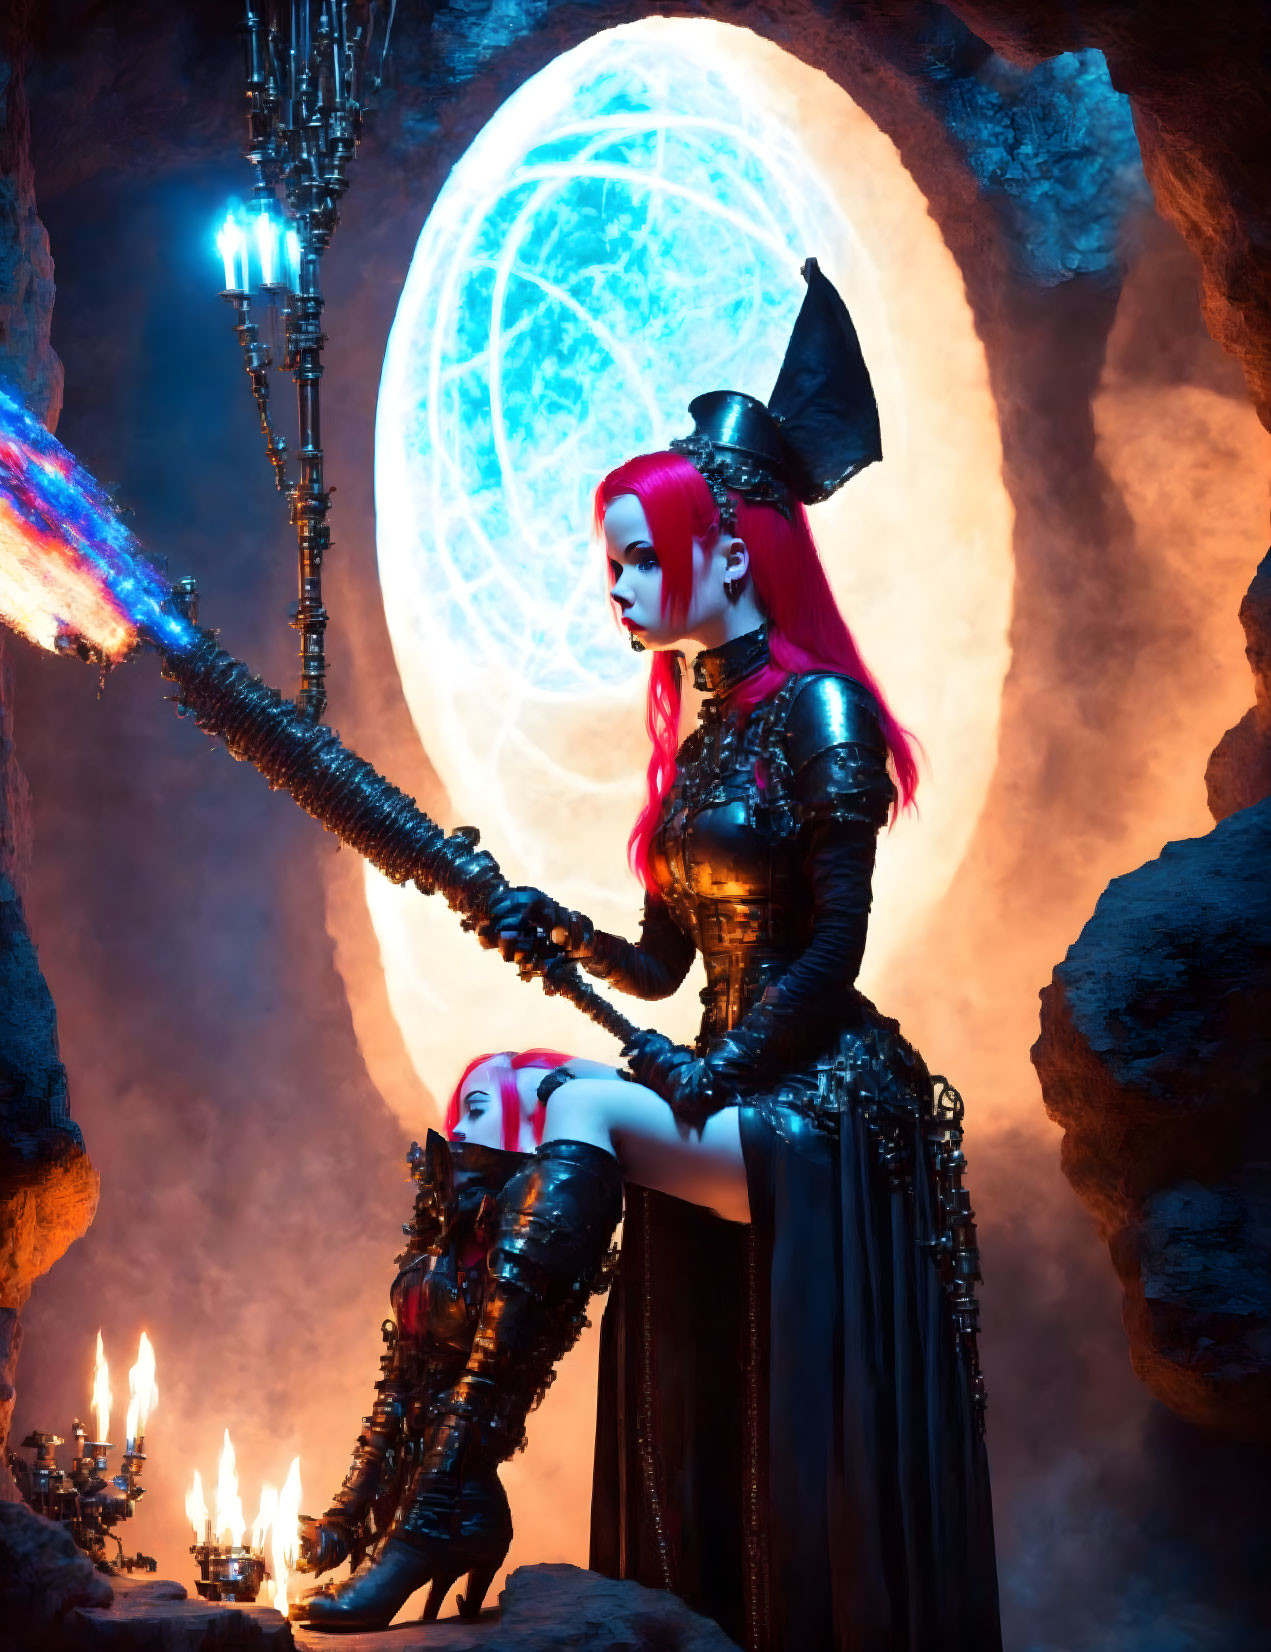 Pink-haired figure in dark fantasy attire with staff in cave surrounded by candles and glowing portal